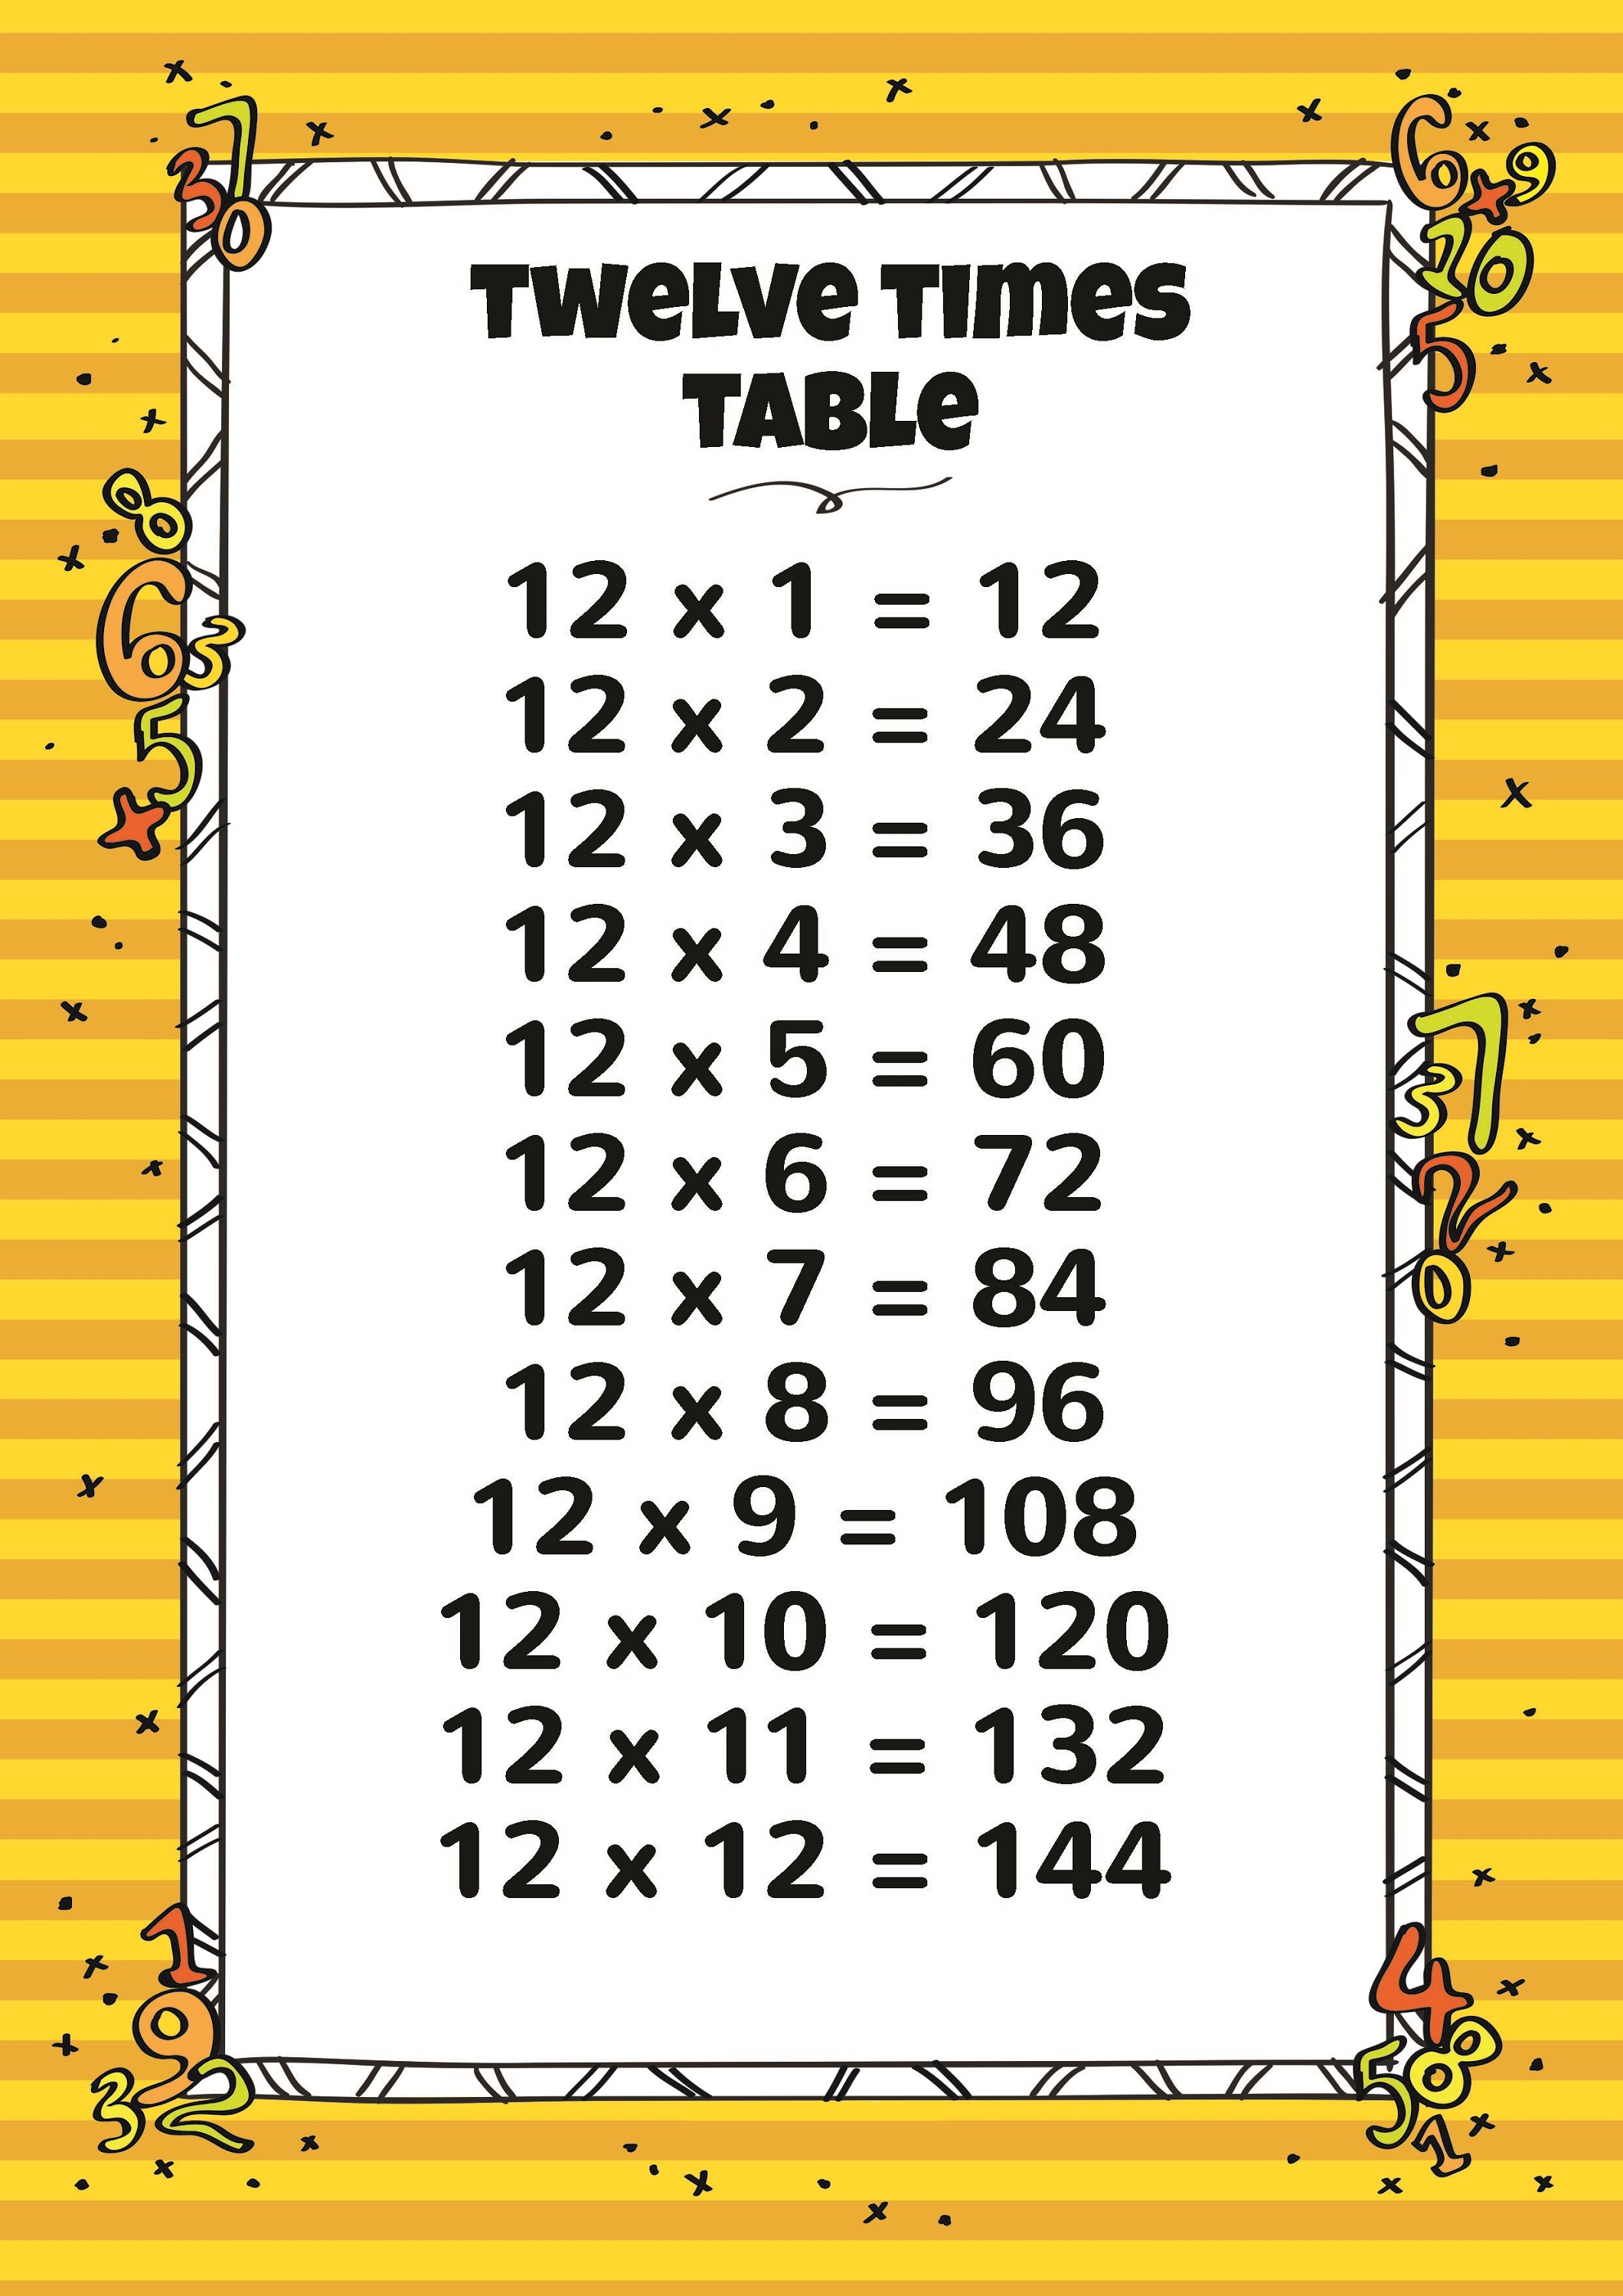 multiplications-by-12-times-table-activity-shelter